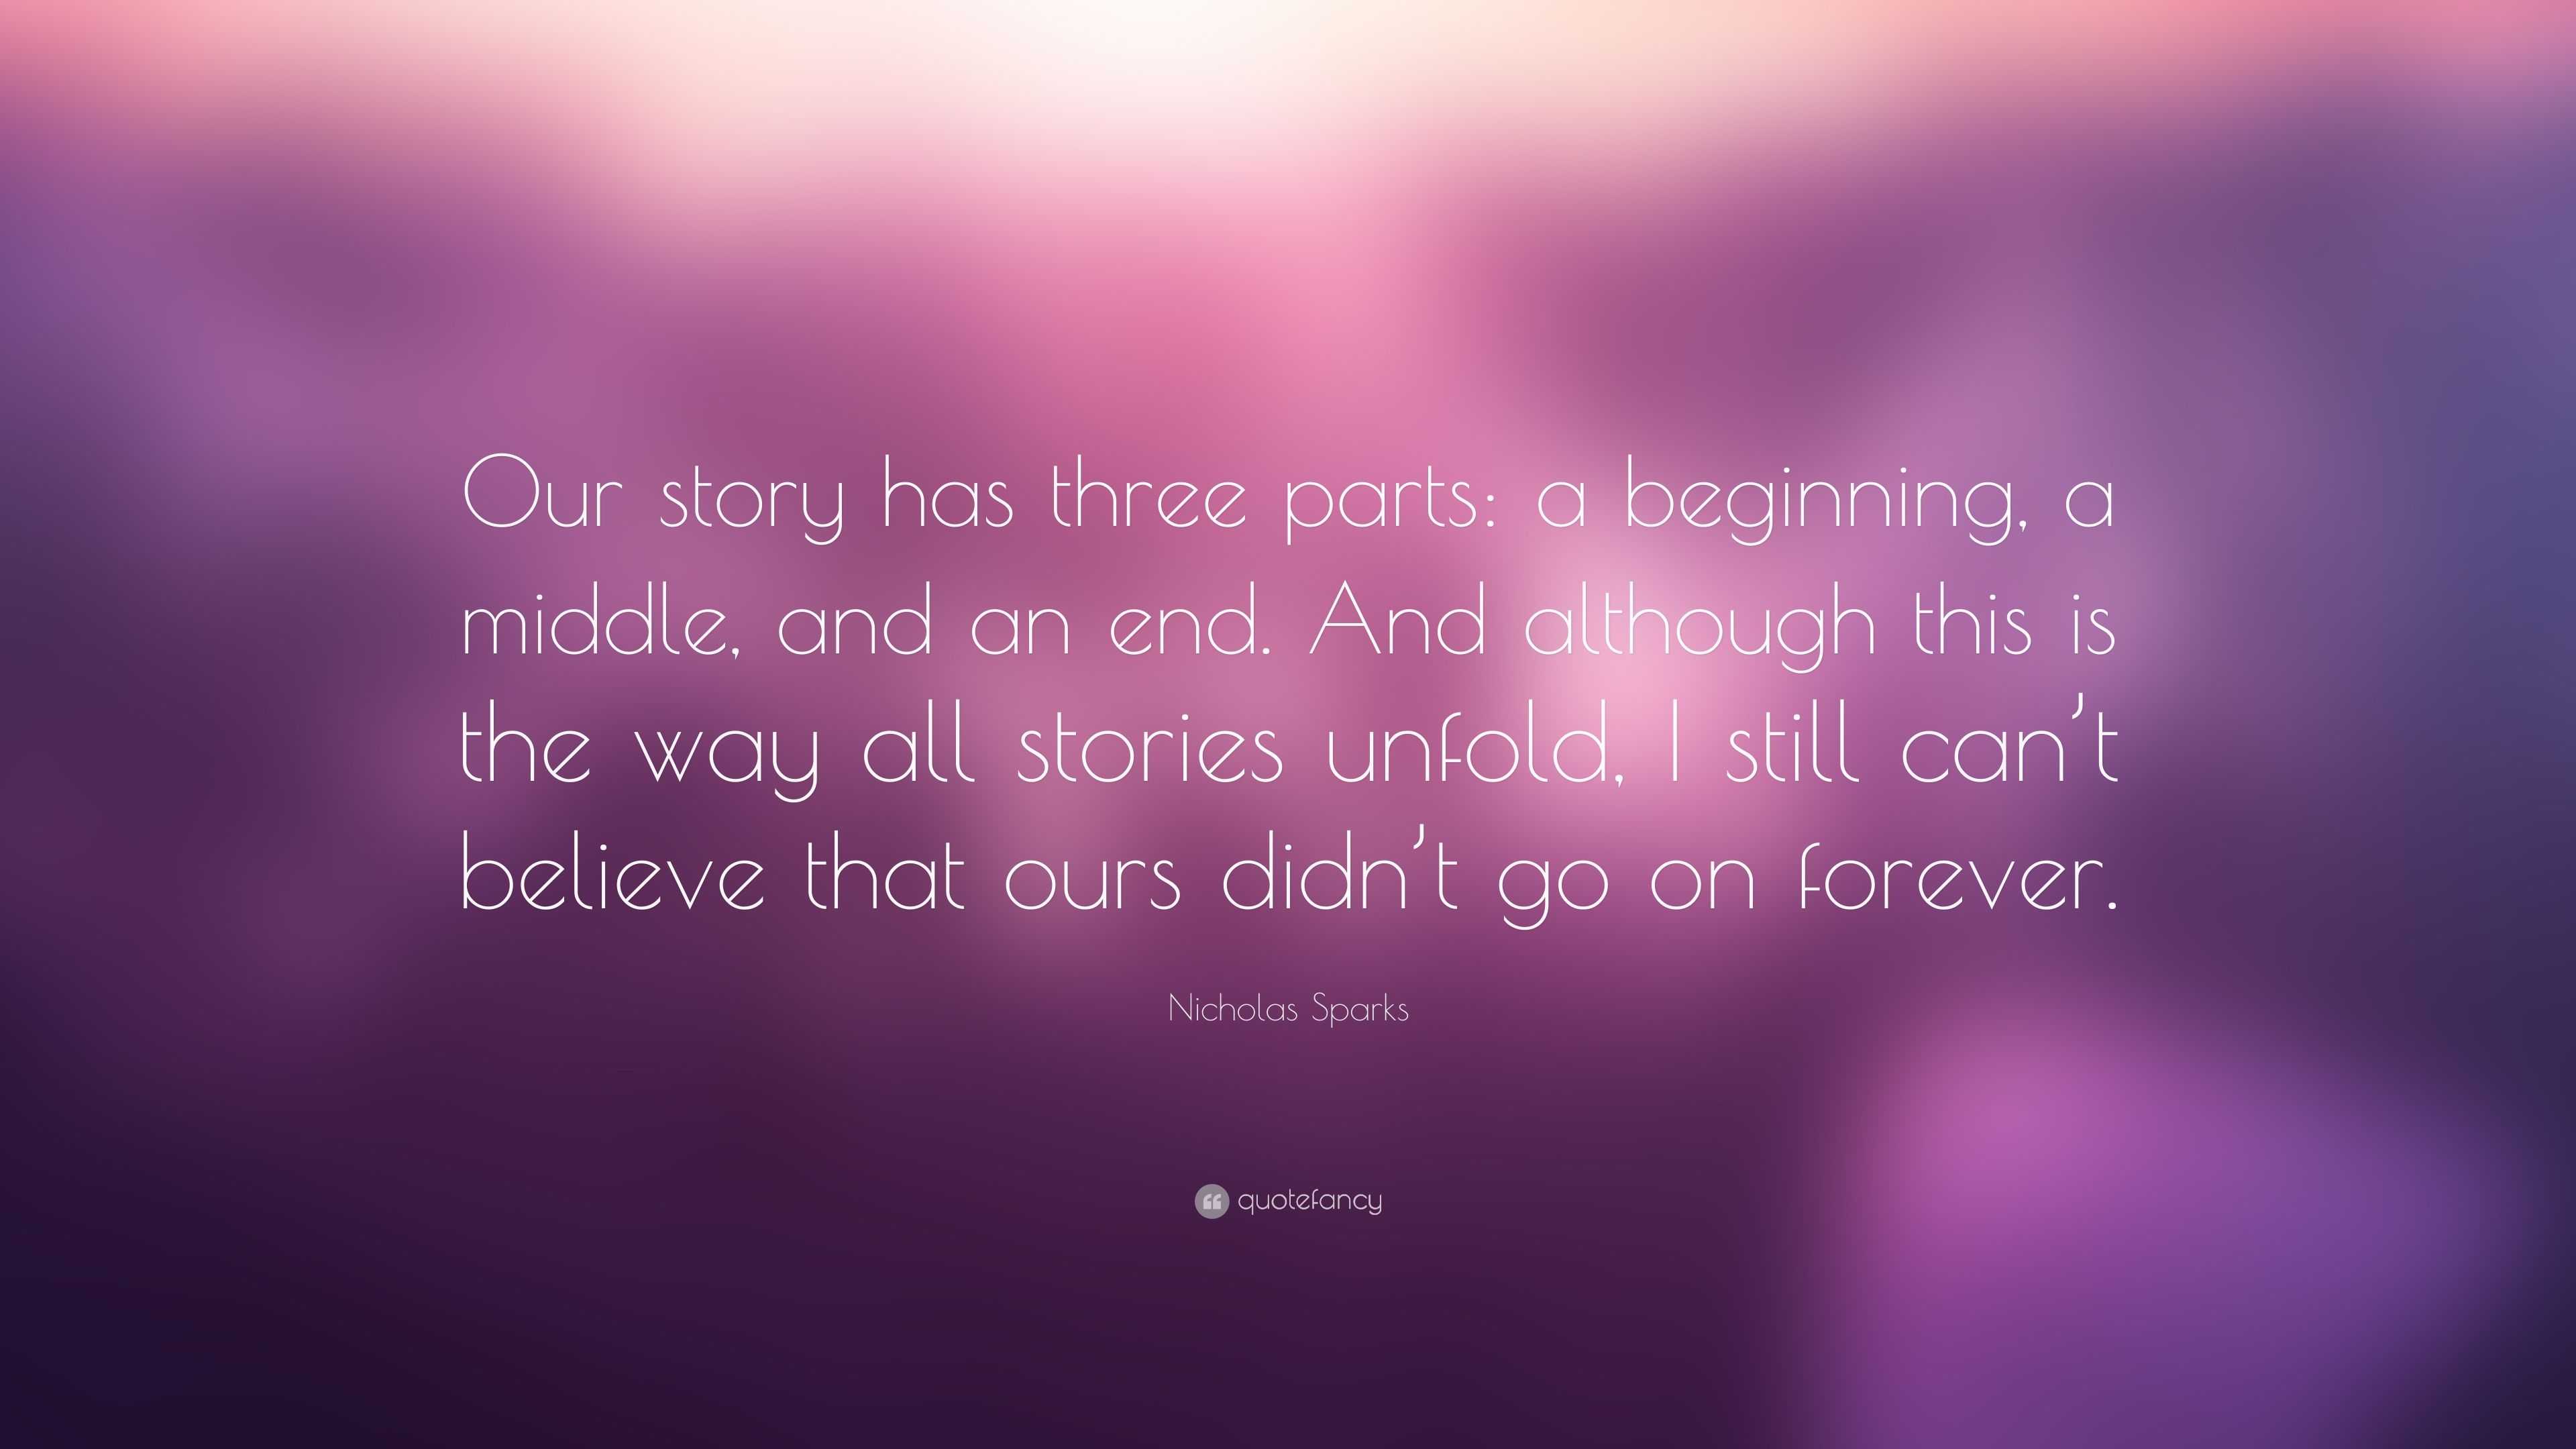 Nicholas Sparks Quote: “Our story has three parts: a beginning, a ...